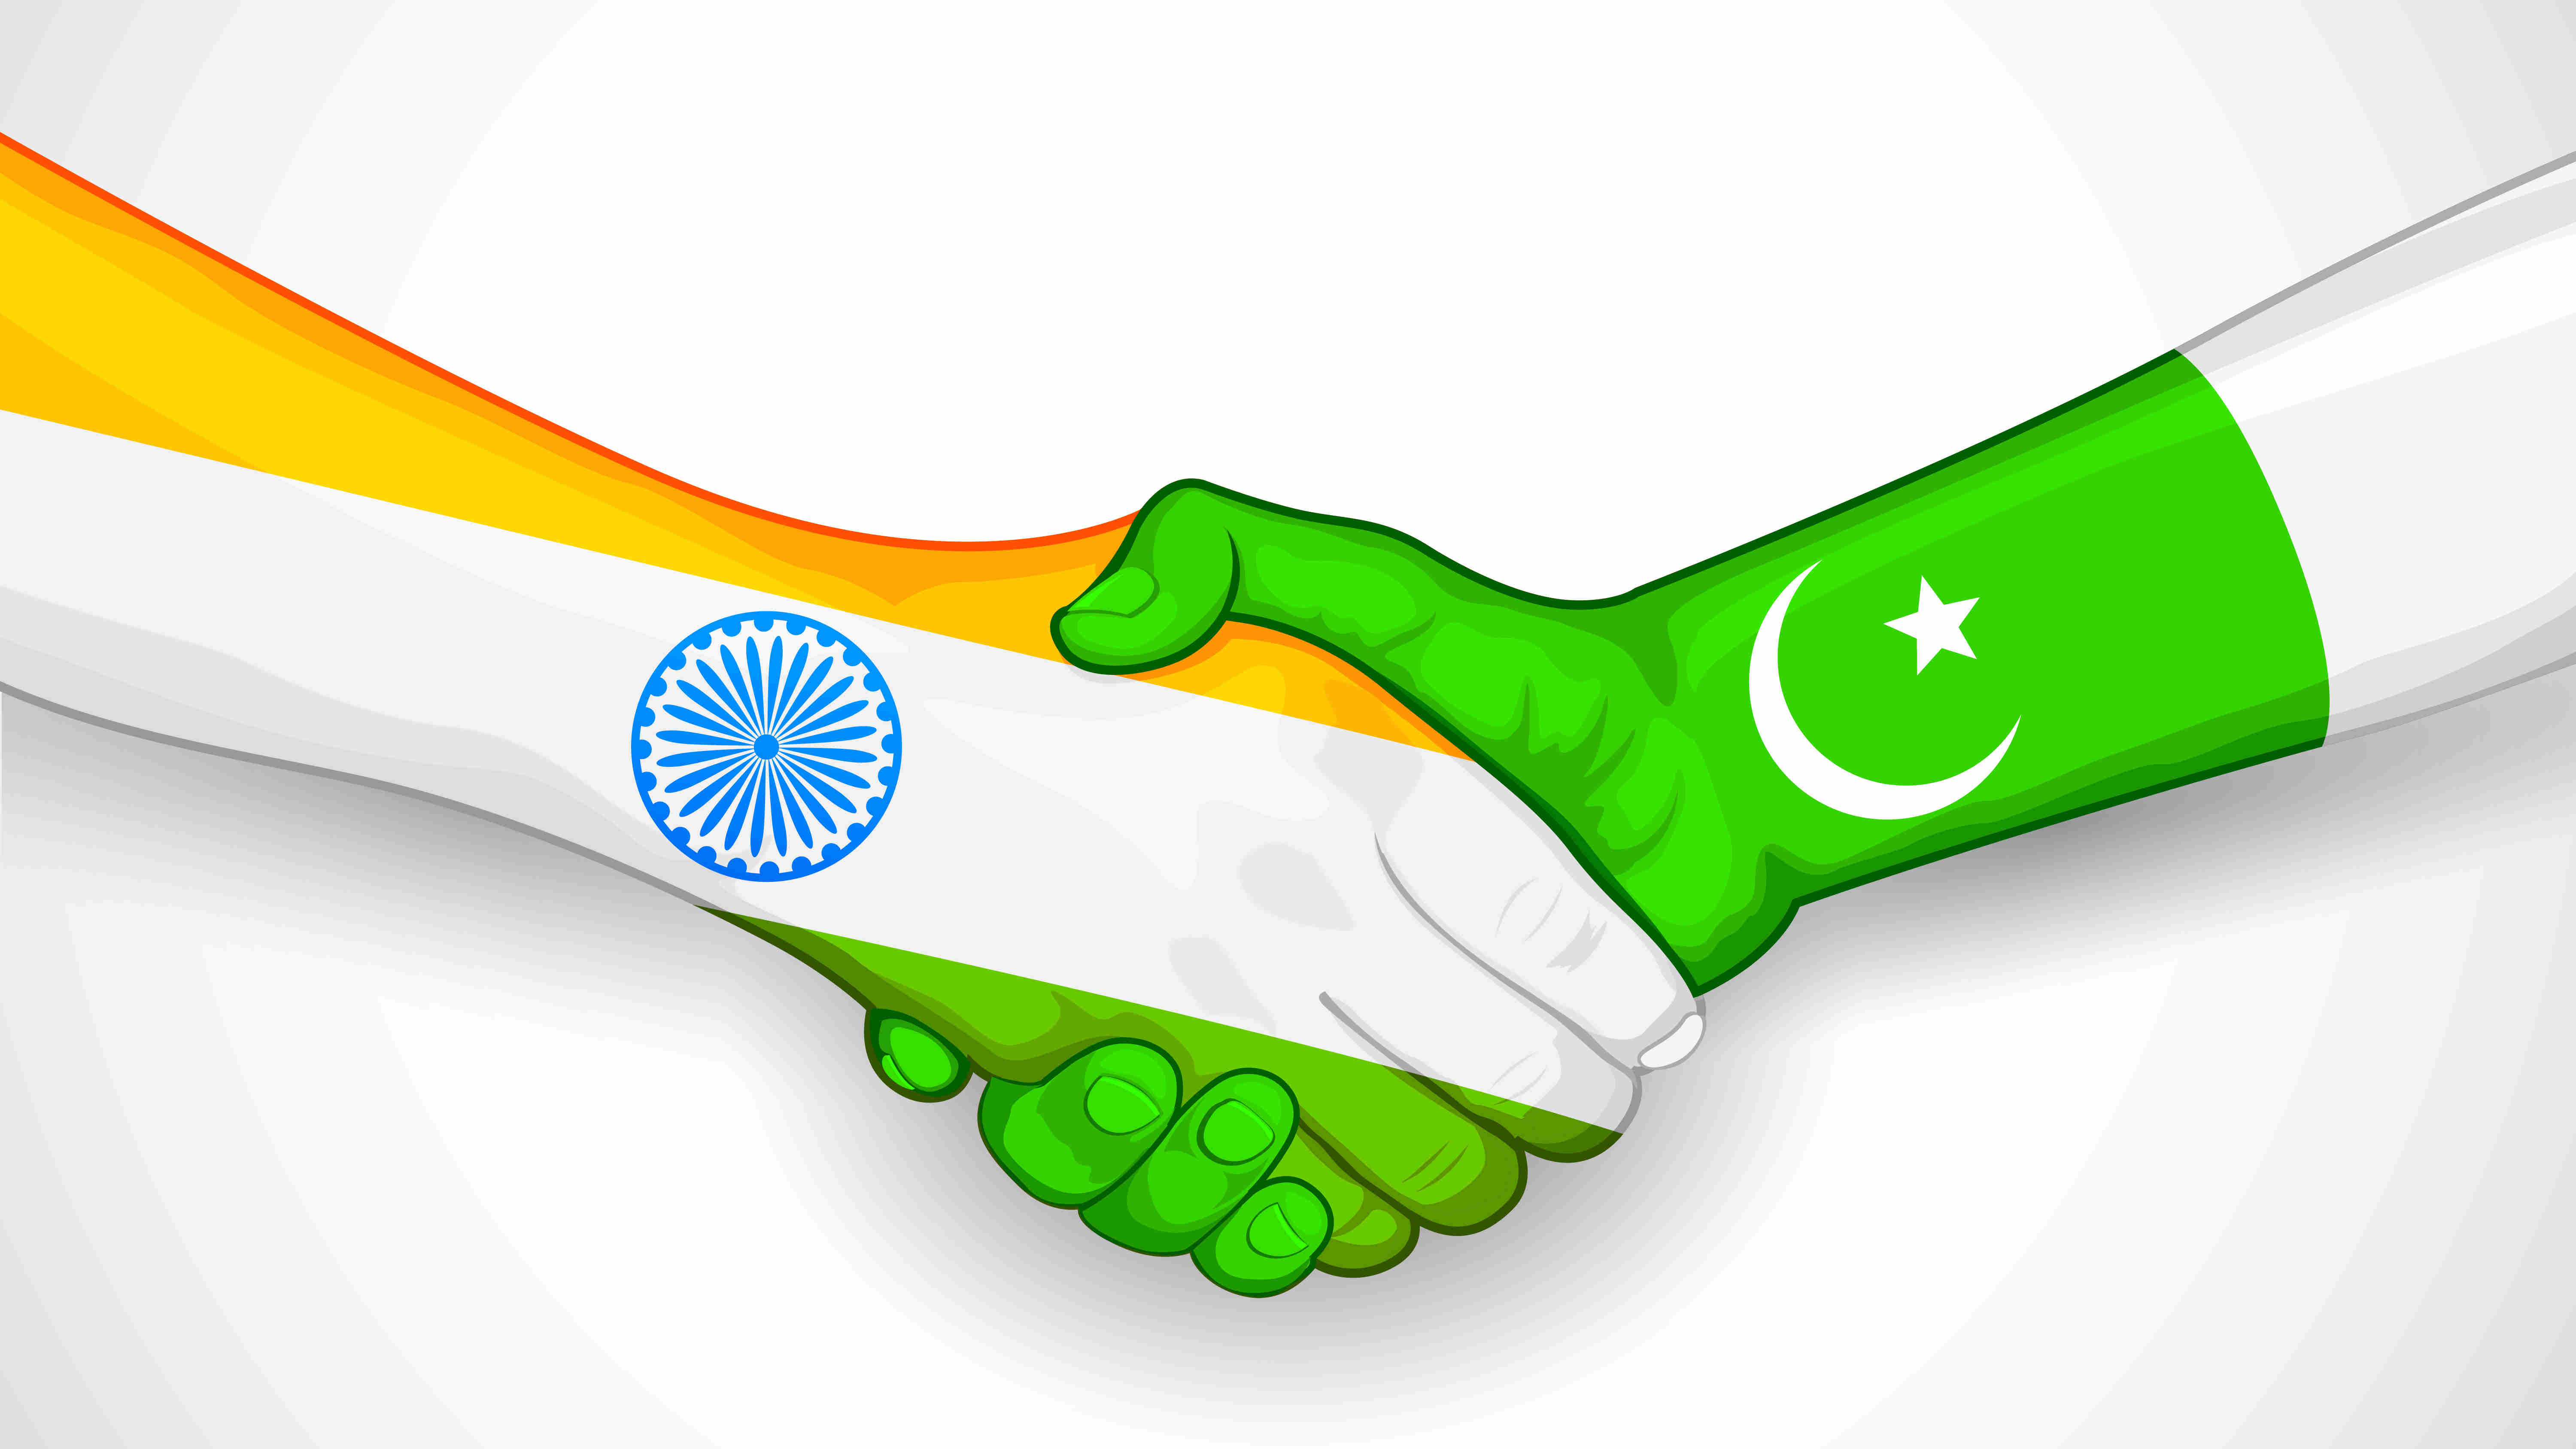 It is time for new beginnings. India and Pakistan should take a step forward and start talking to each other. 